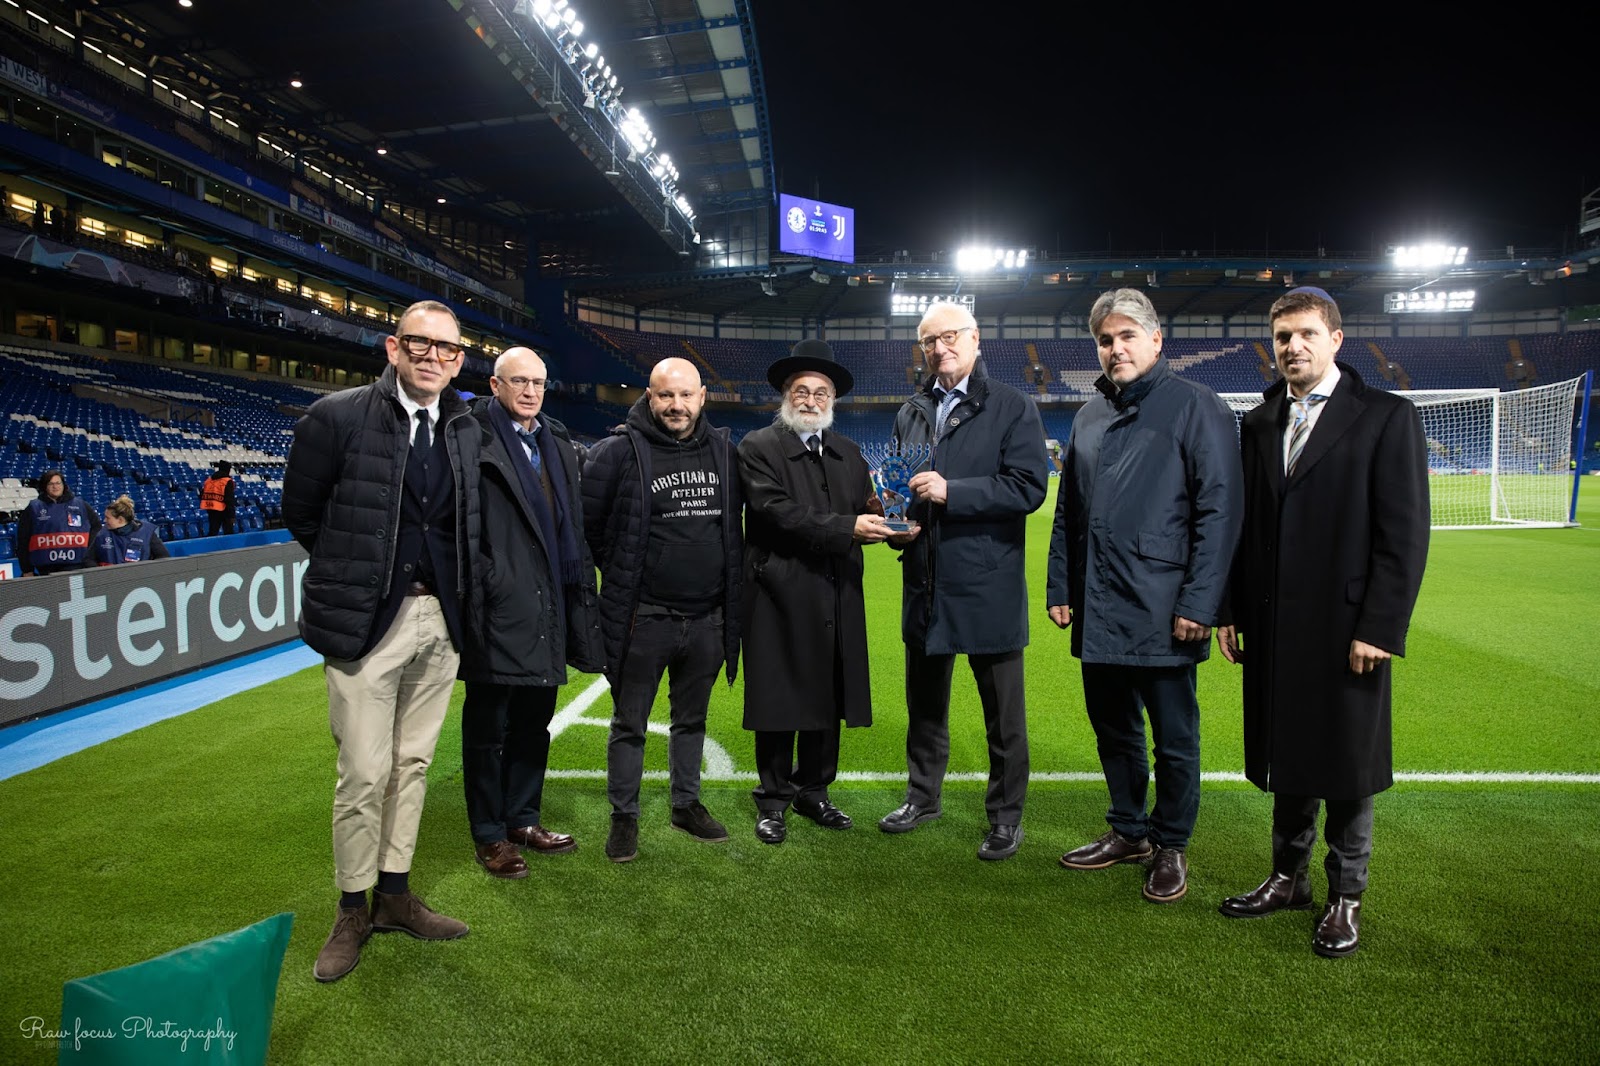 From L to R: Alex Benjamin, Director of the European Jewish Association, Andrew Cohen, President of the UK Federation of Synagogues, Abdallah Chatila, philanthropist and previous recipient of King David Award, Chief Rabbi Binyomin Jacobs of the Netherlands, Chelsea FC Chairman Bruce Buck, EJA lay leader and philanthropist Gabor Futo and Rabbi Eli Edlekopf, Director of European Jewish Development. Picture by Dina Erlich.